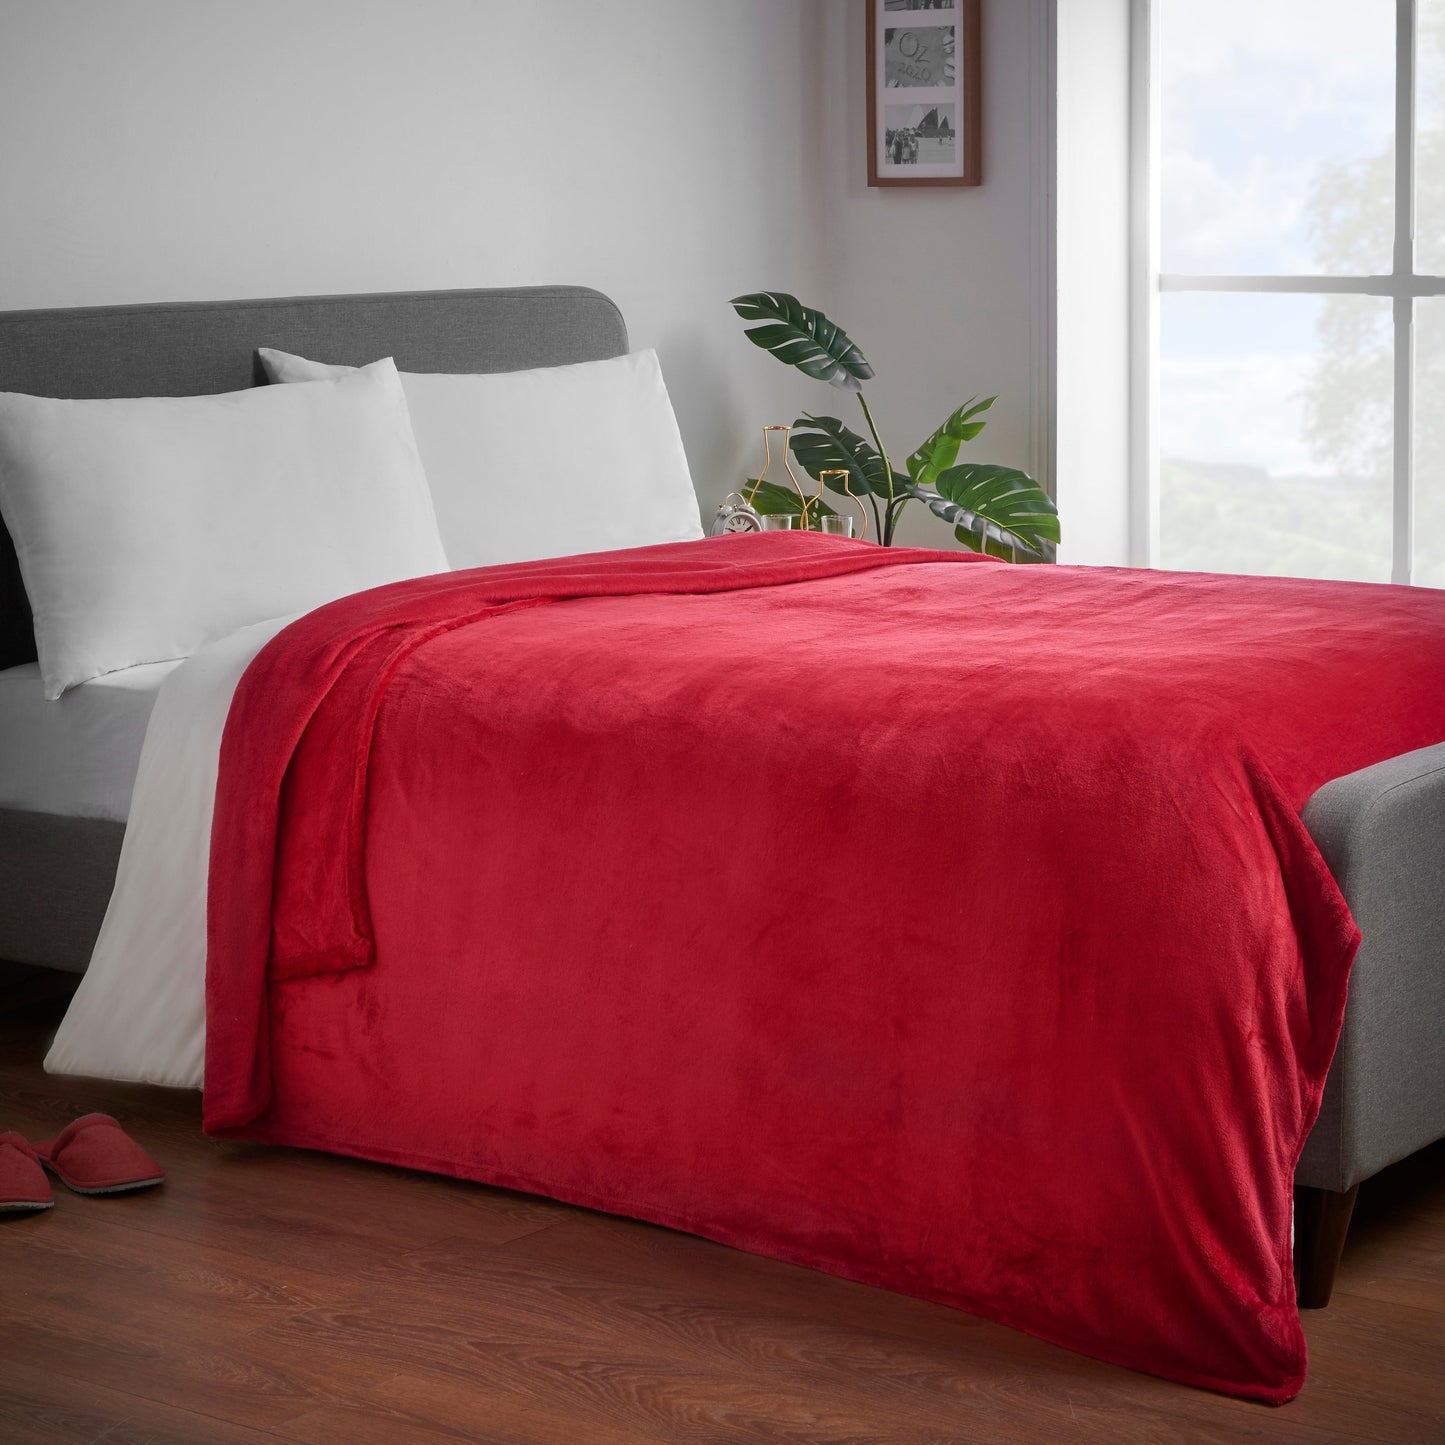 Super Soft Flannel Throw - Red